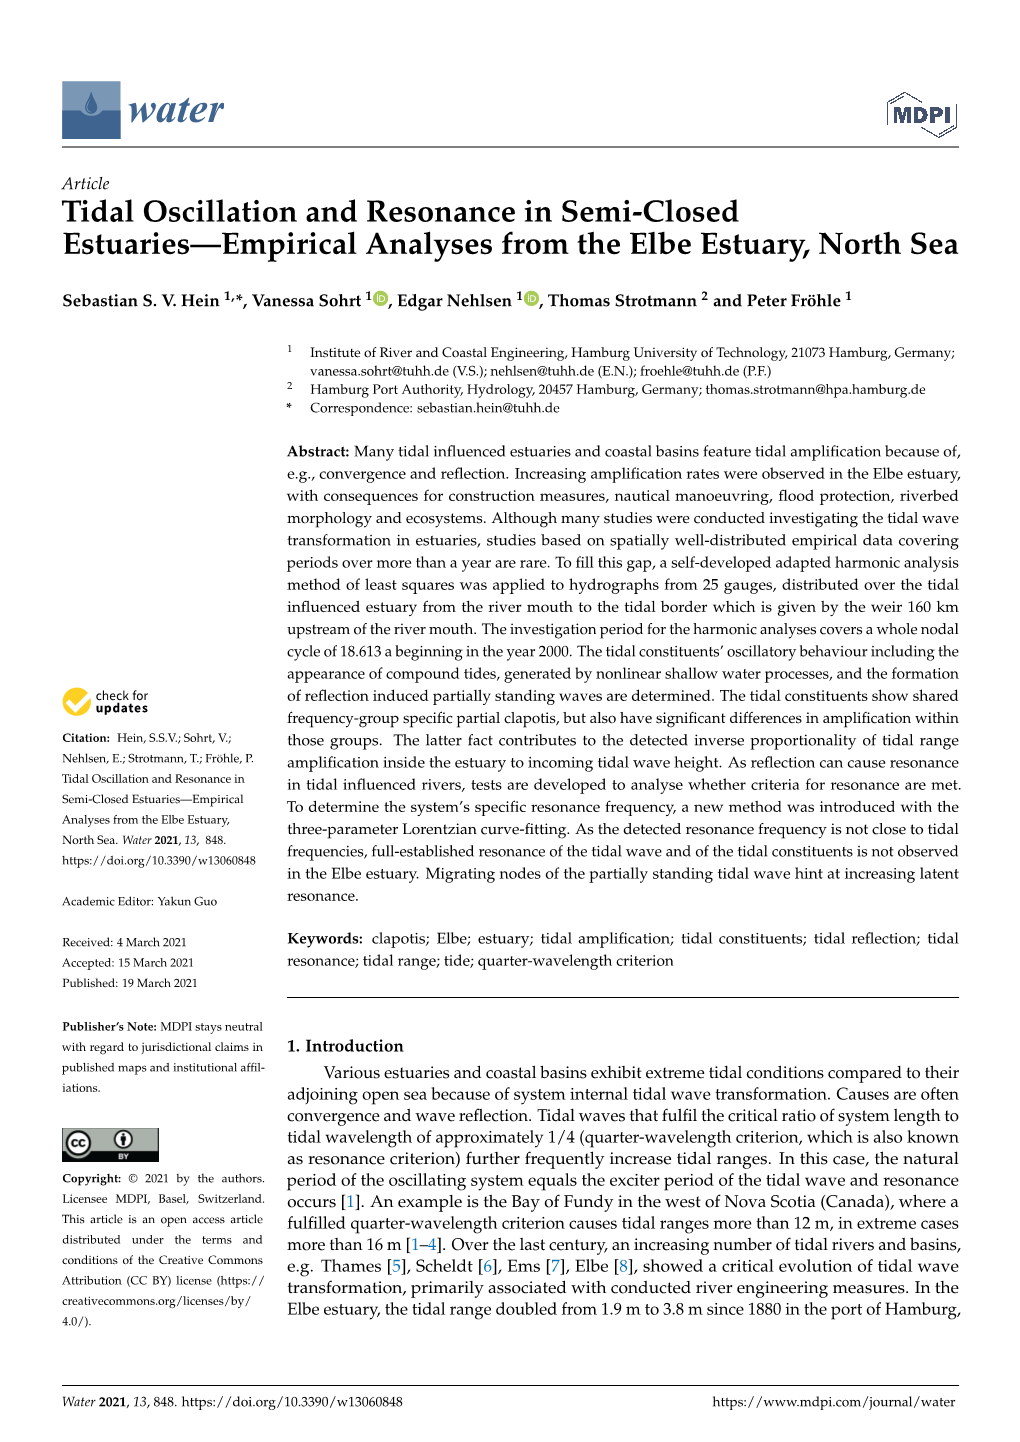 Tidal Oscillation and Resonance in Semi-Closed Estuaries—Empirical Analyses from the Elbe Estuary, North Sea